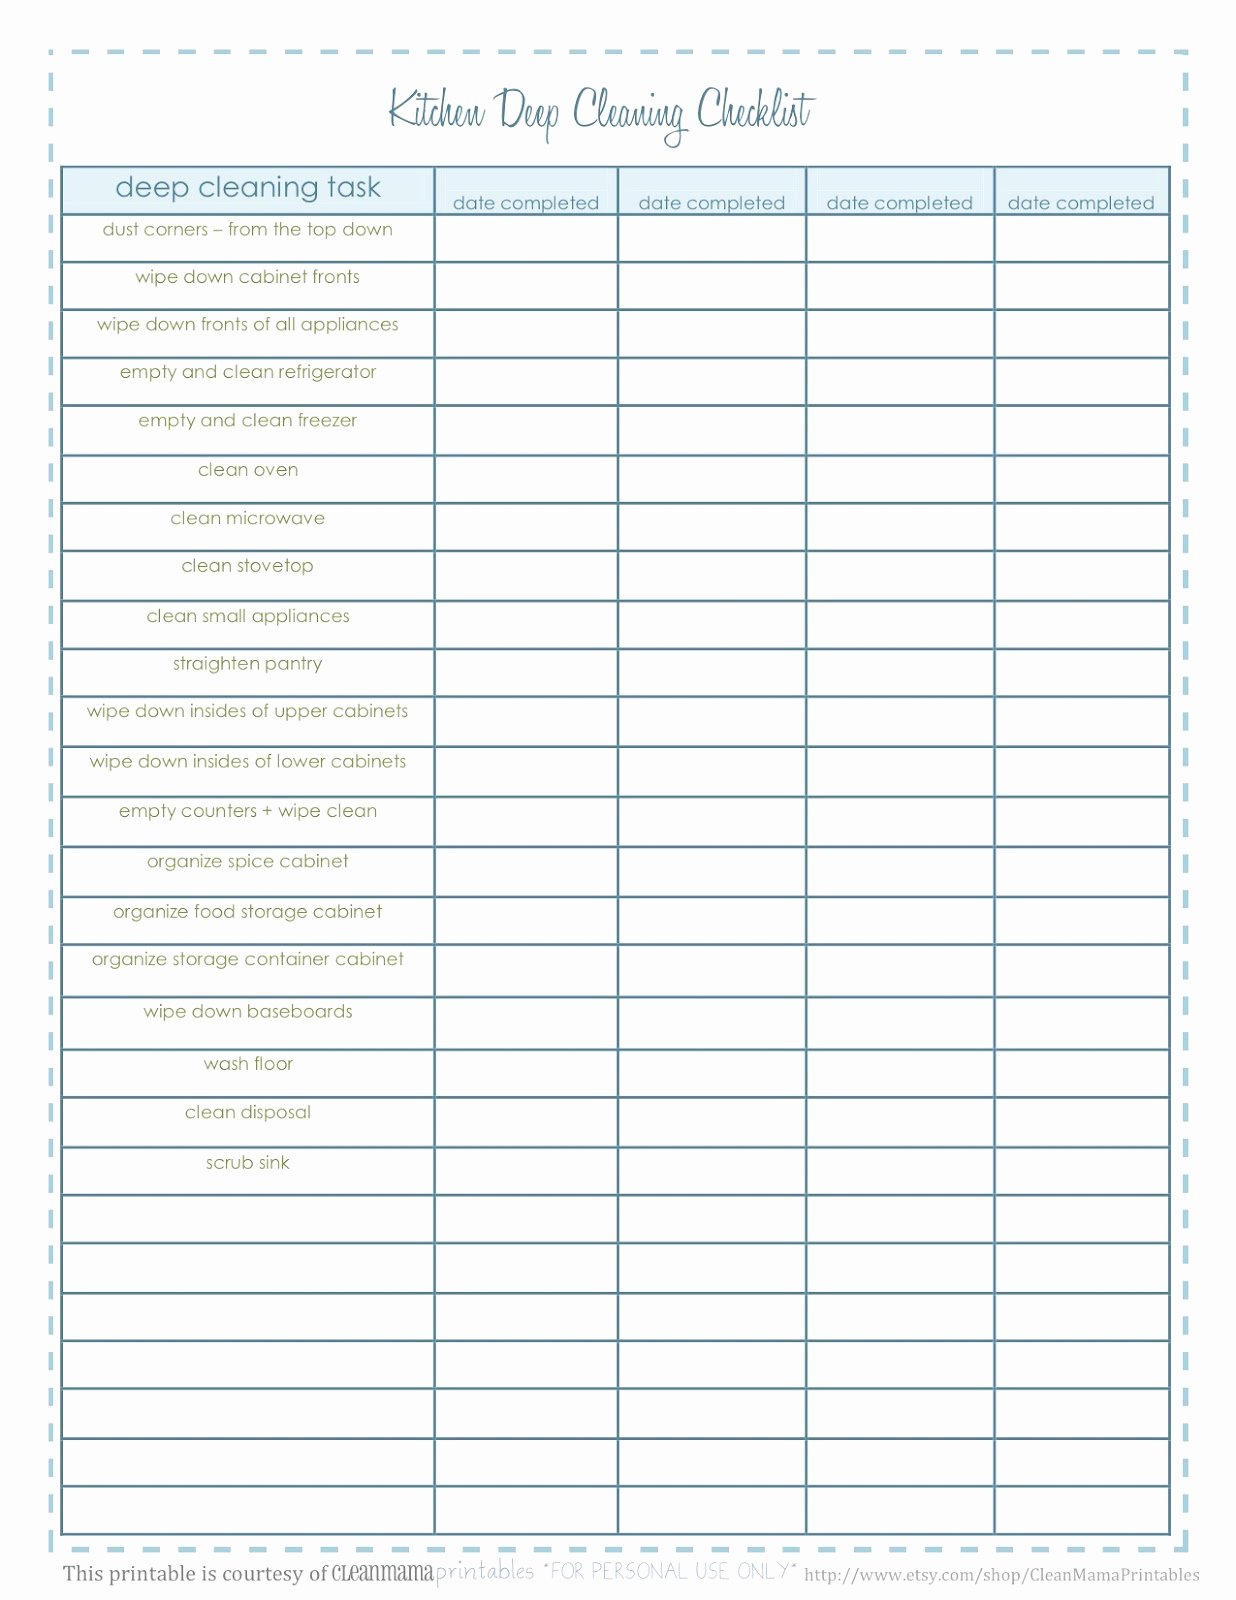 Deep Cleaning Checklist Template Lovely Creative Life Designs May 2012